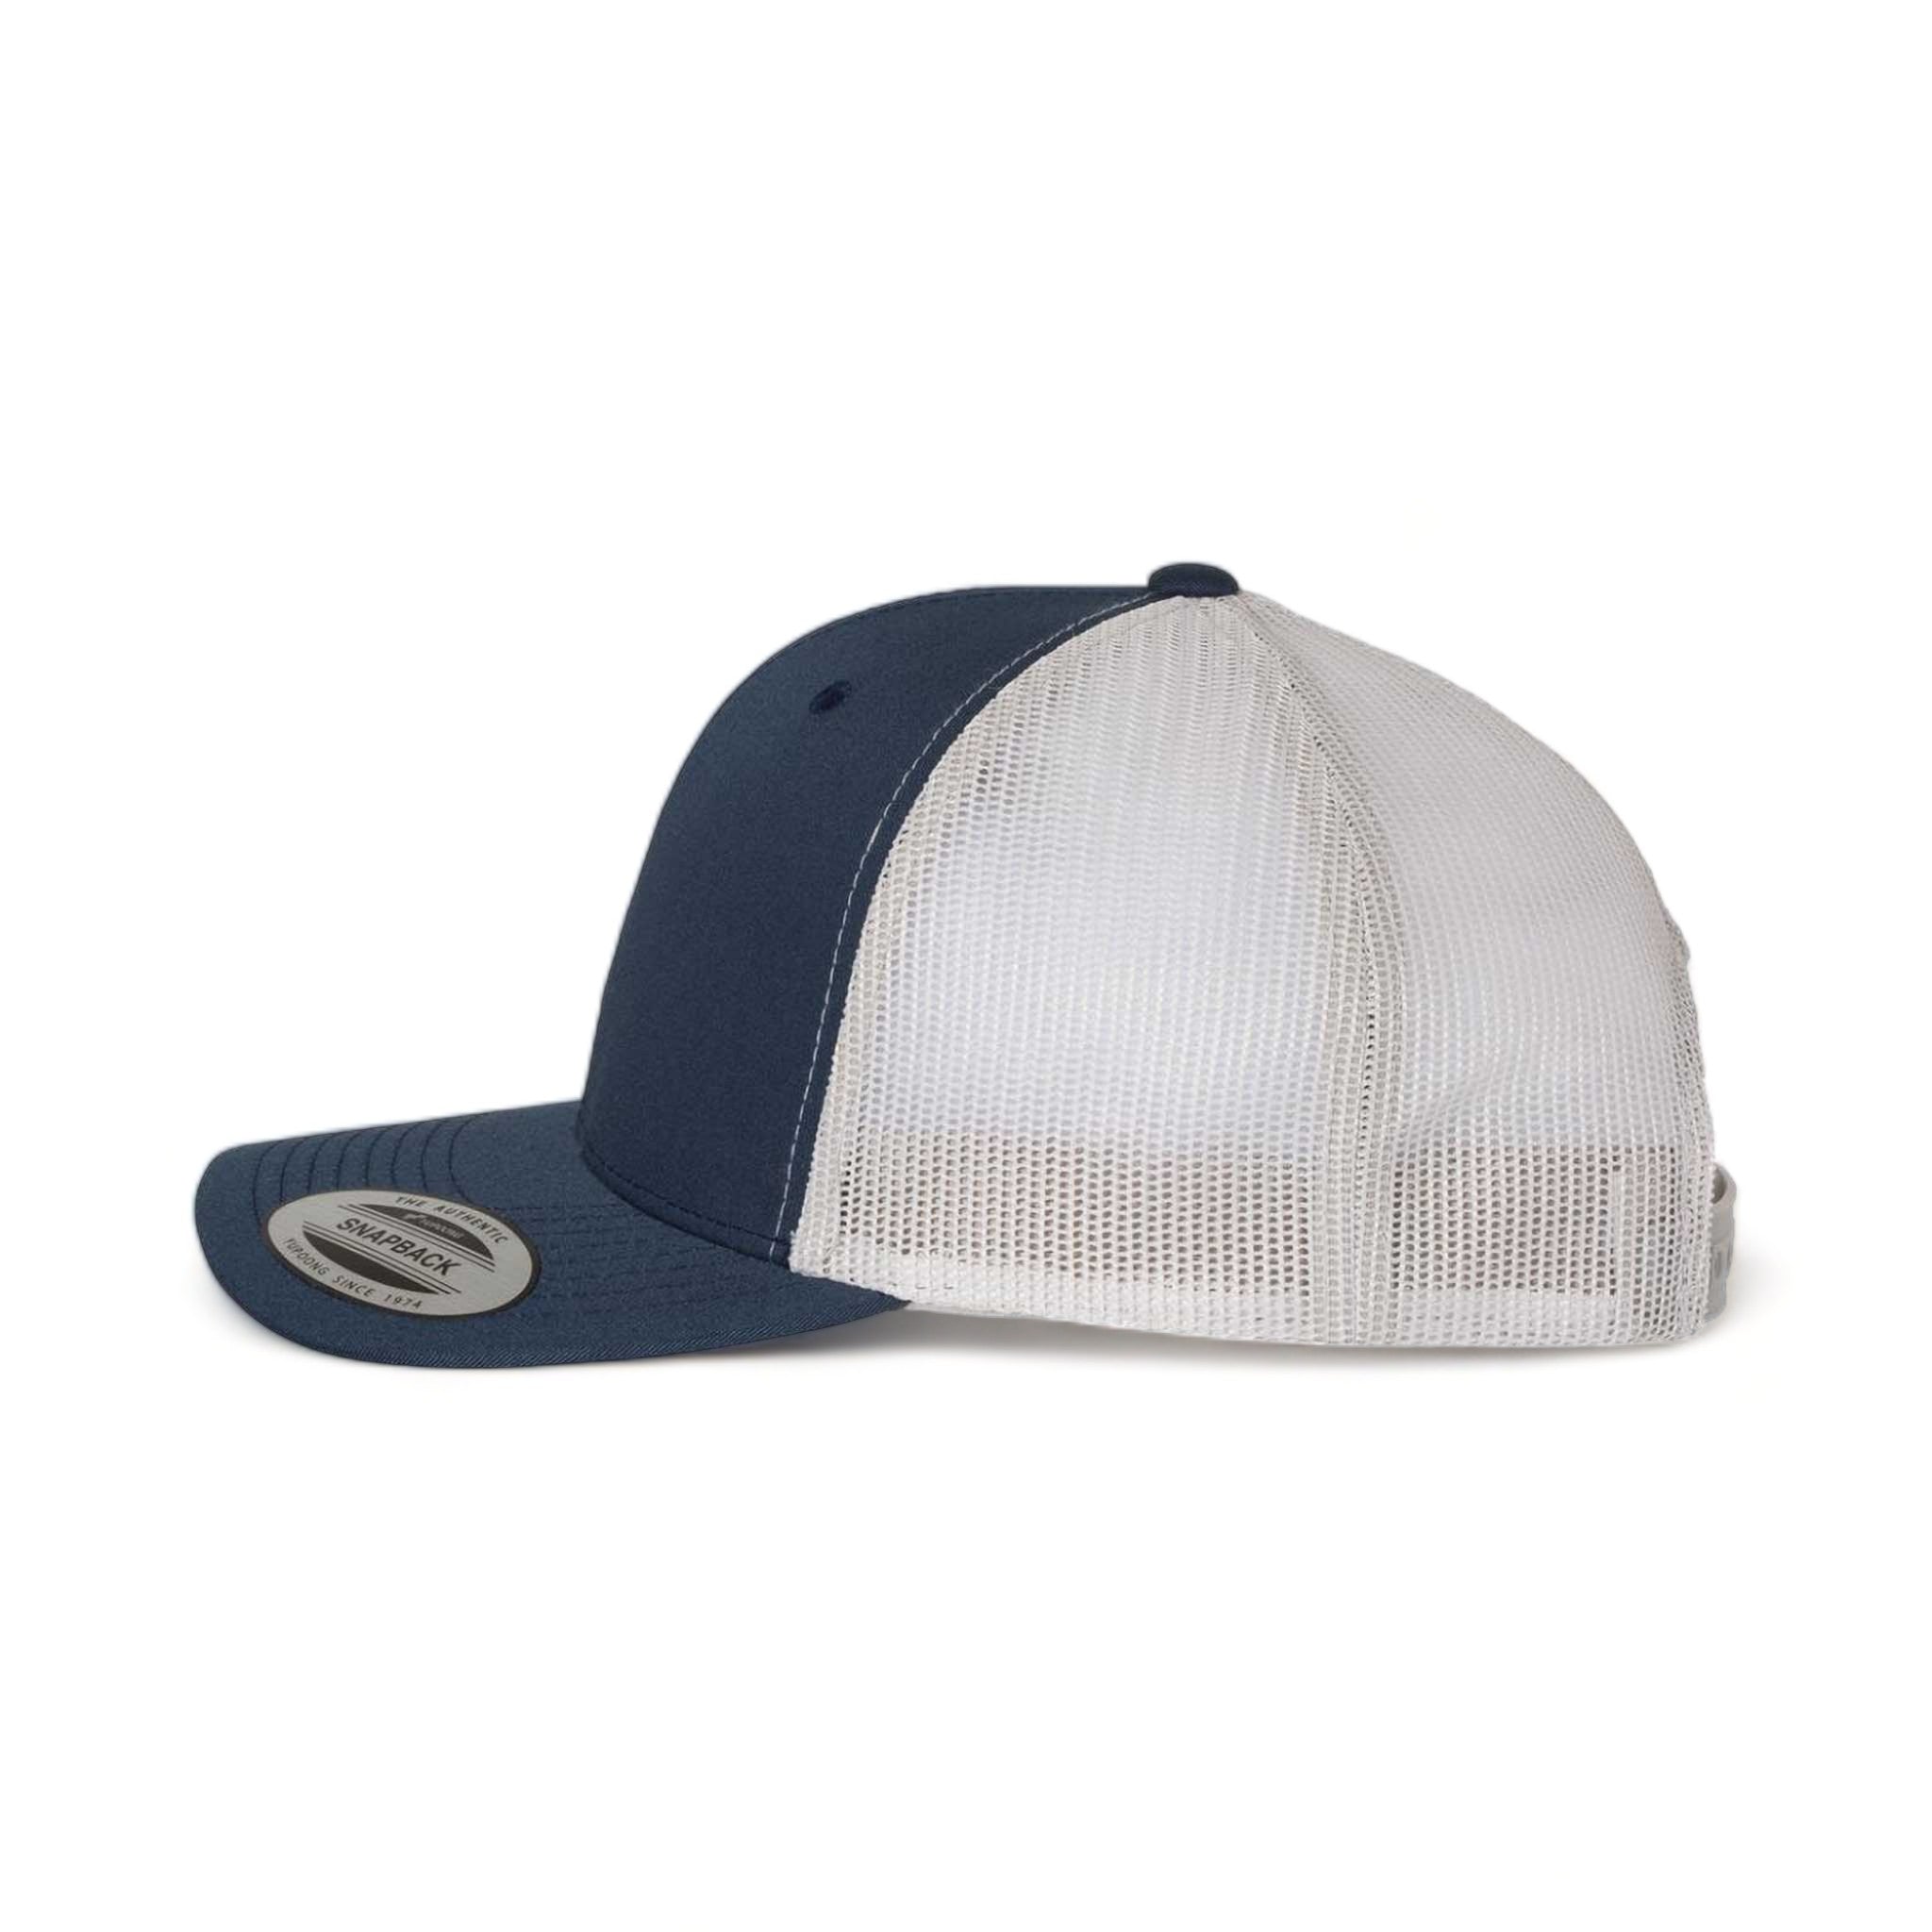 Side view of YP Classics 6606 custom hat in navy and silver